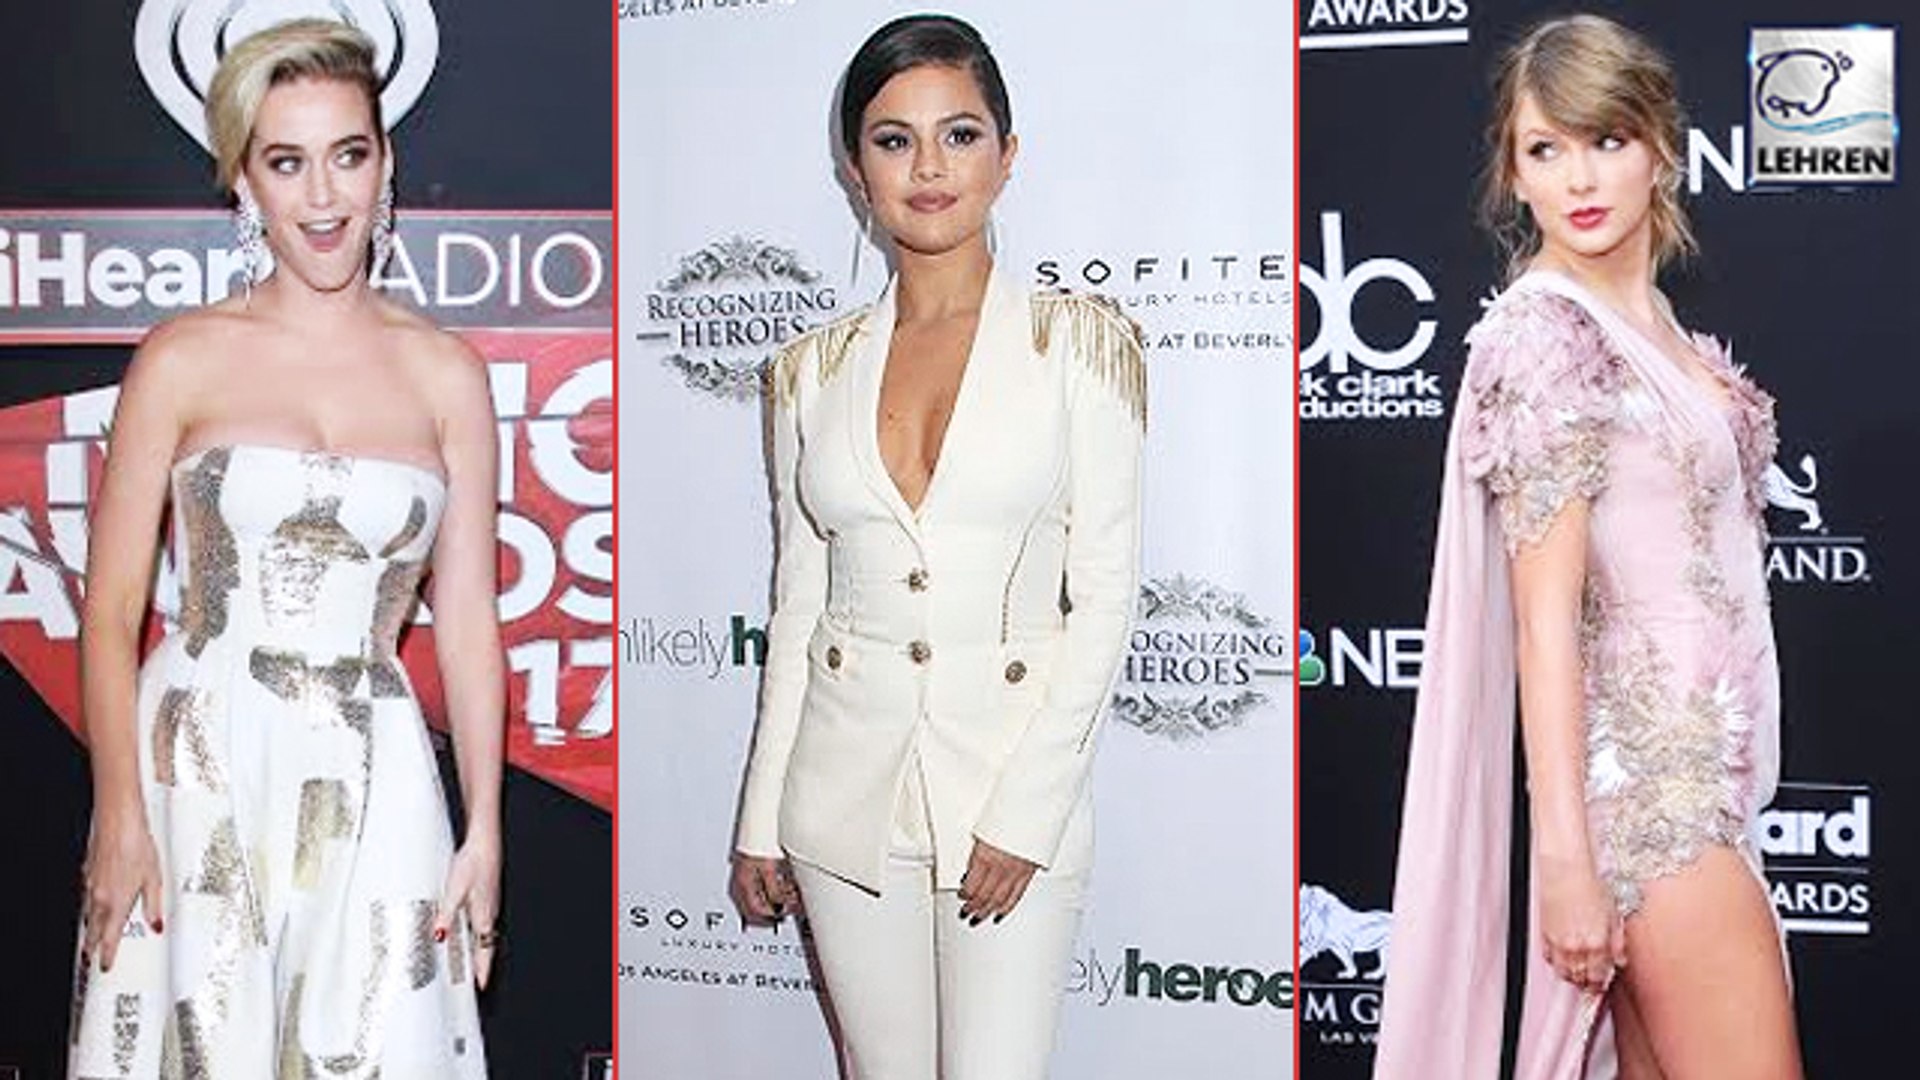 Selena Gomez and Katy Perry To Collaborate With Taylor Swift?